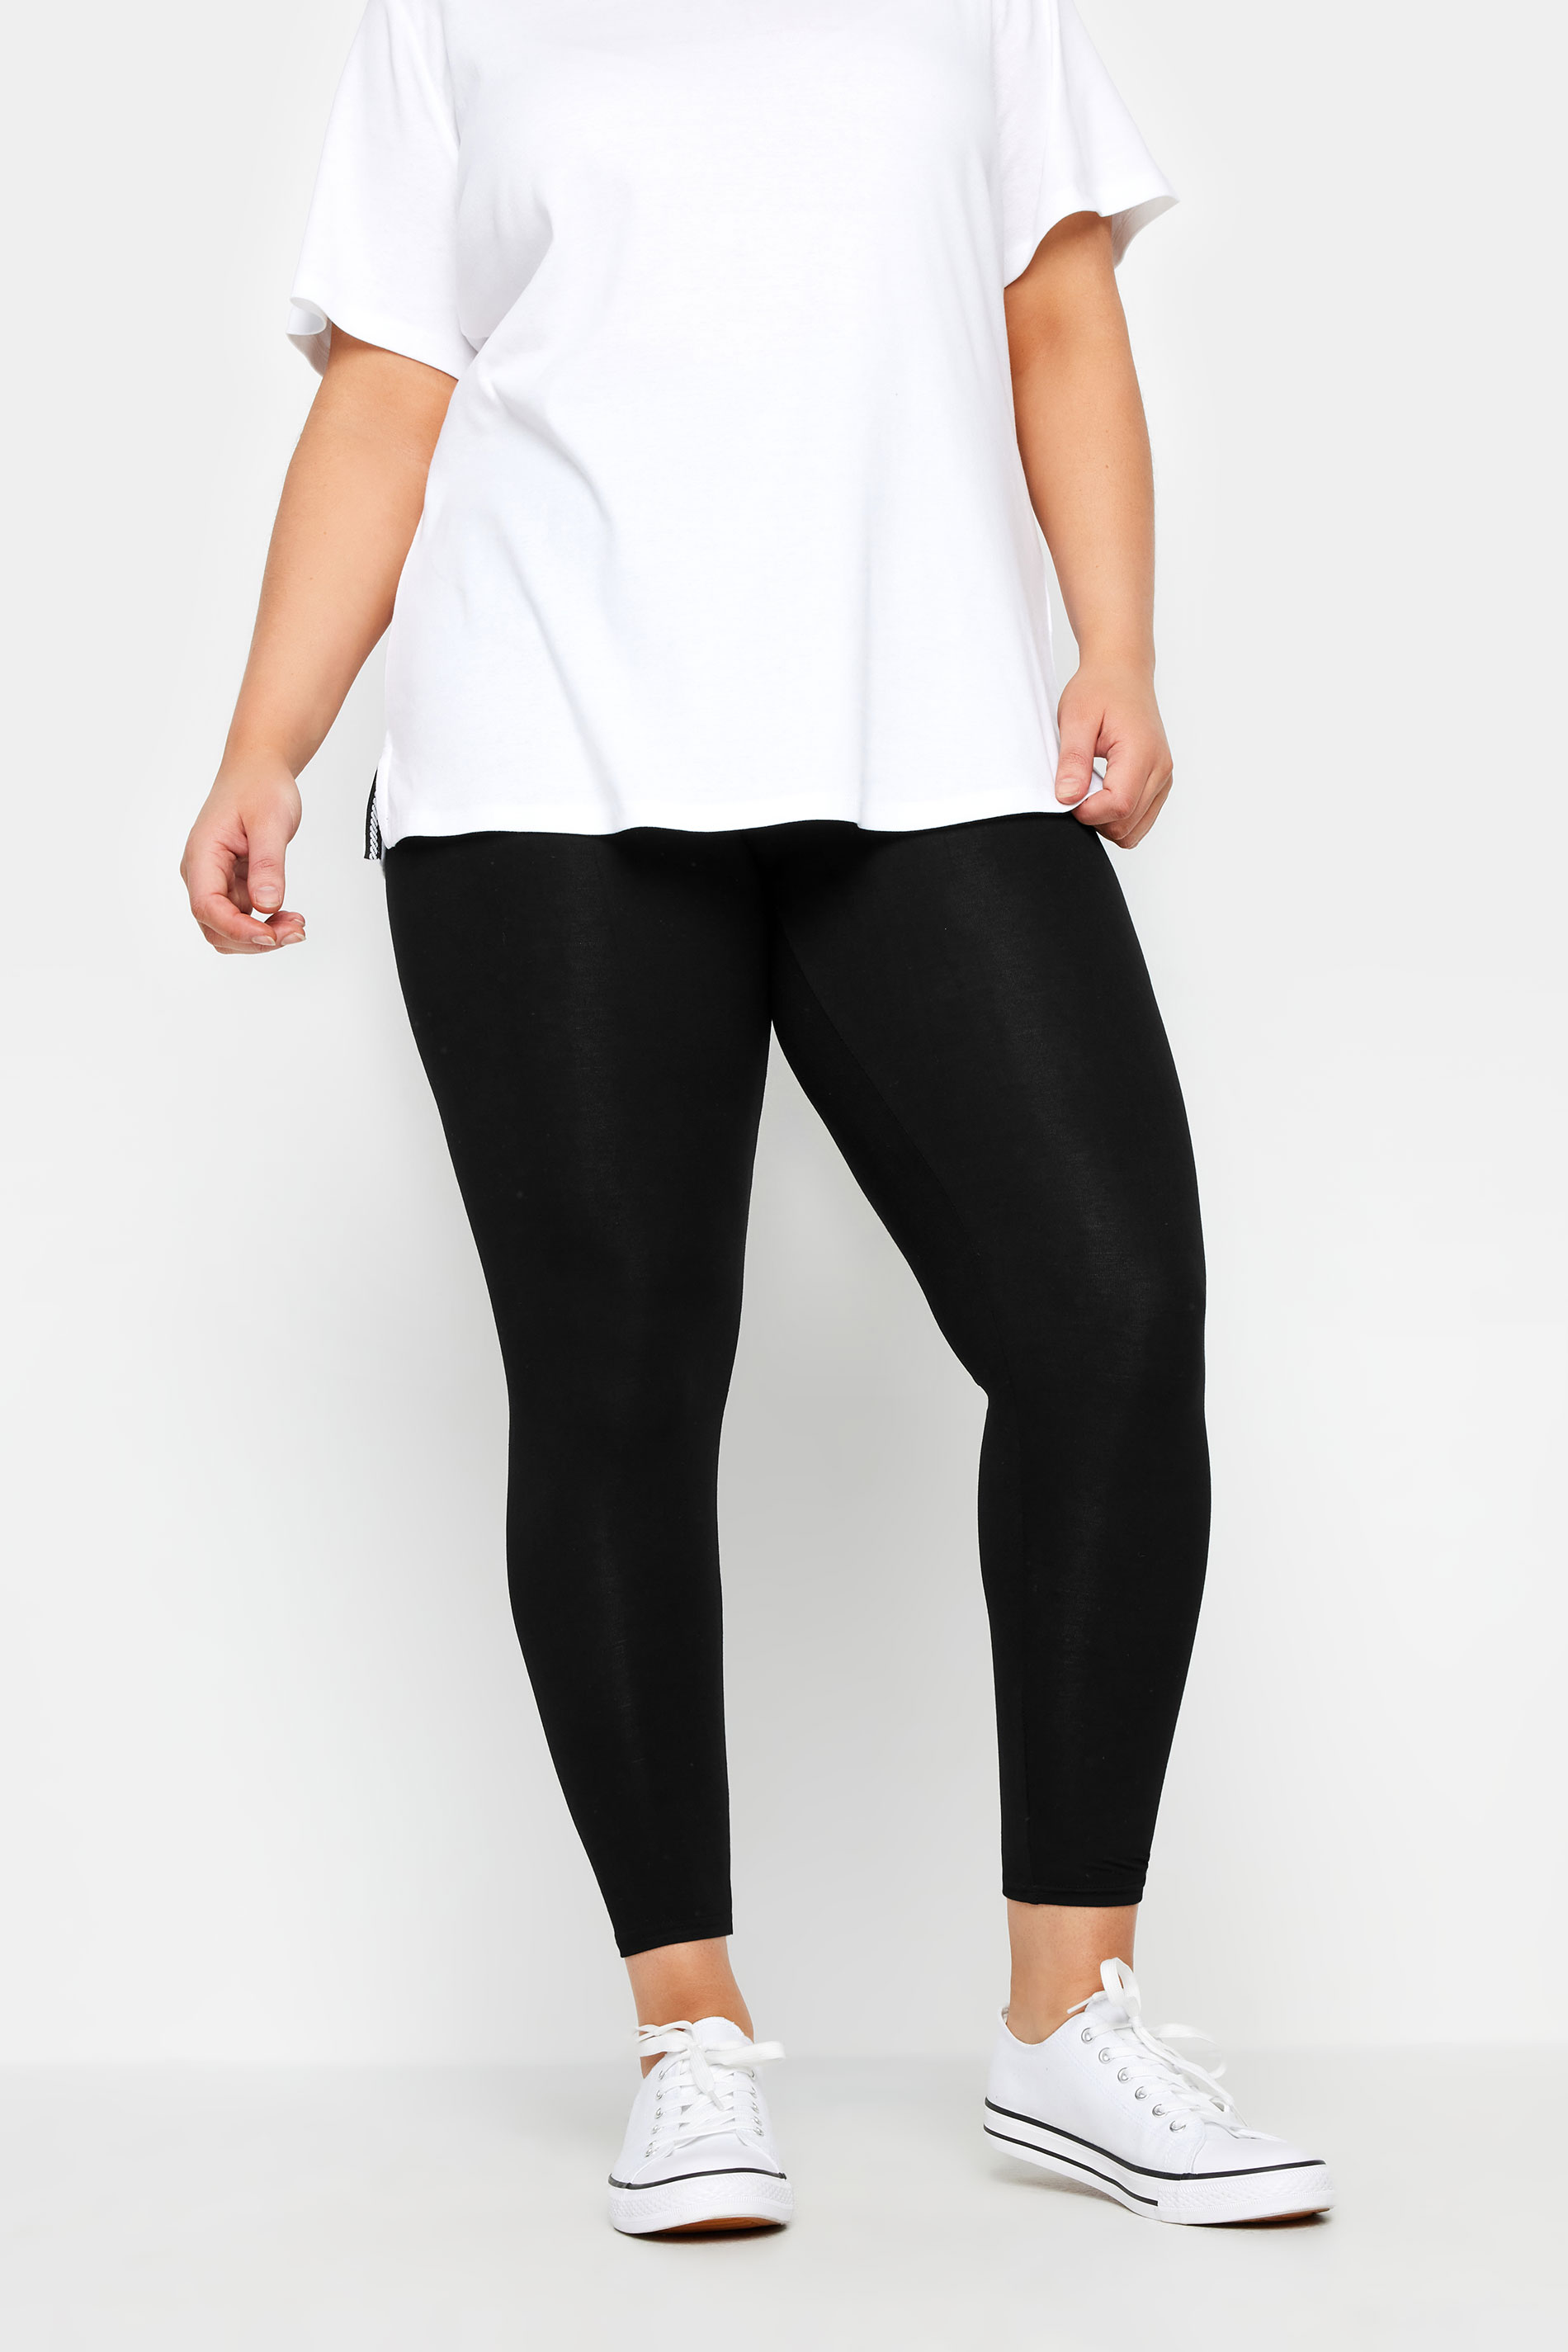 Buy PandaWears Ankle Fit Leggings - Stretch Fit (3XL, Black) at